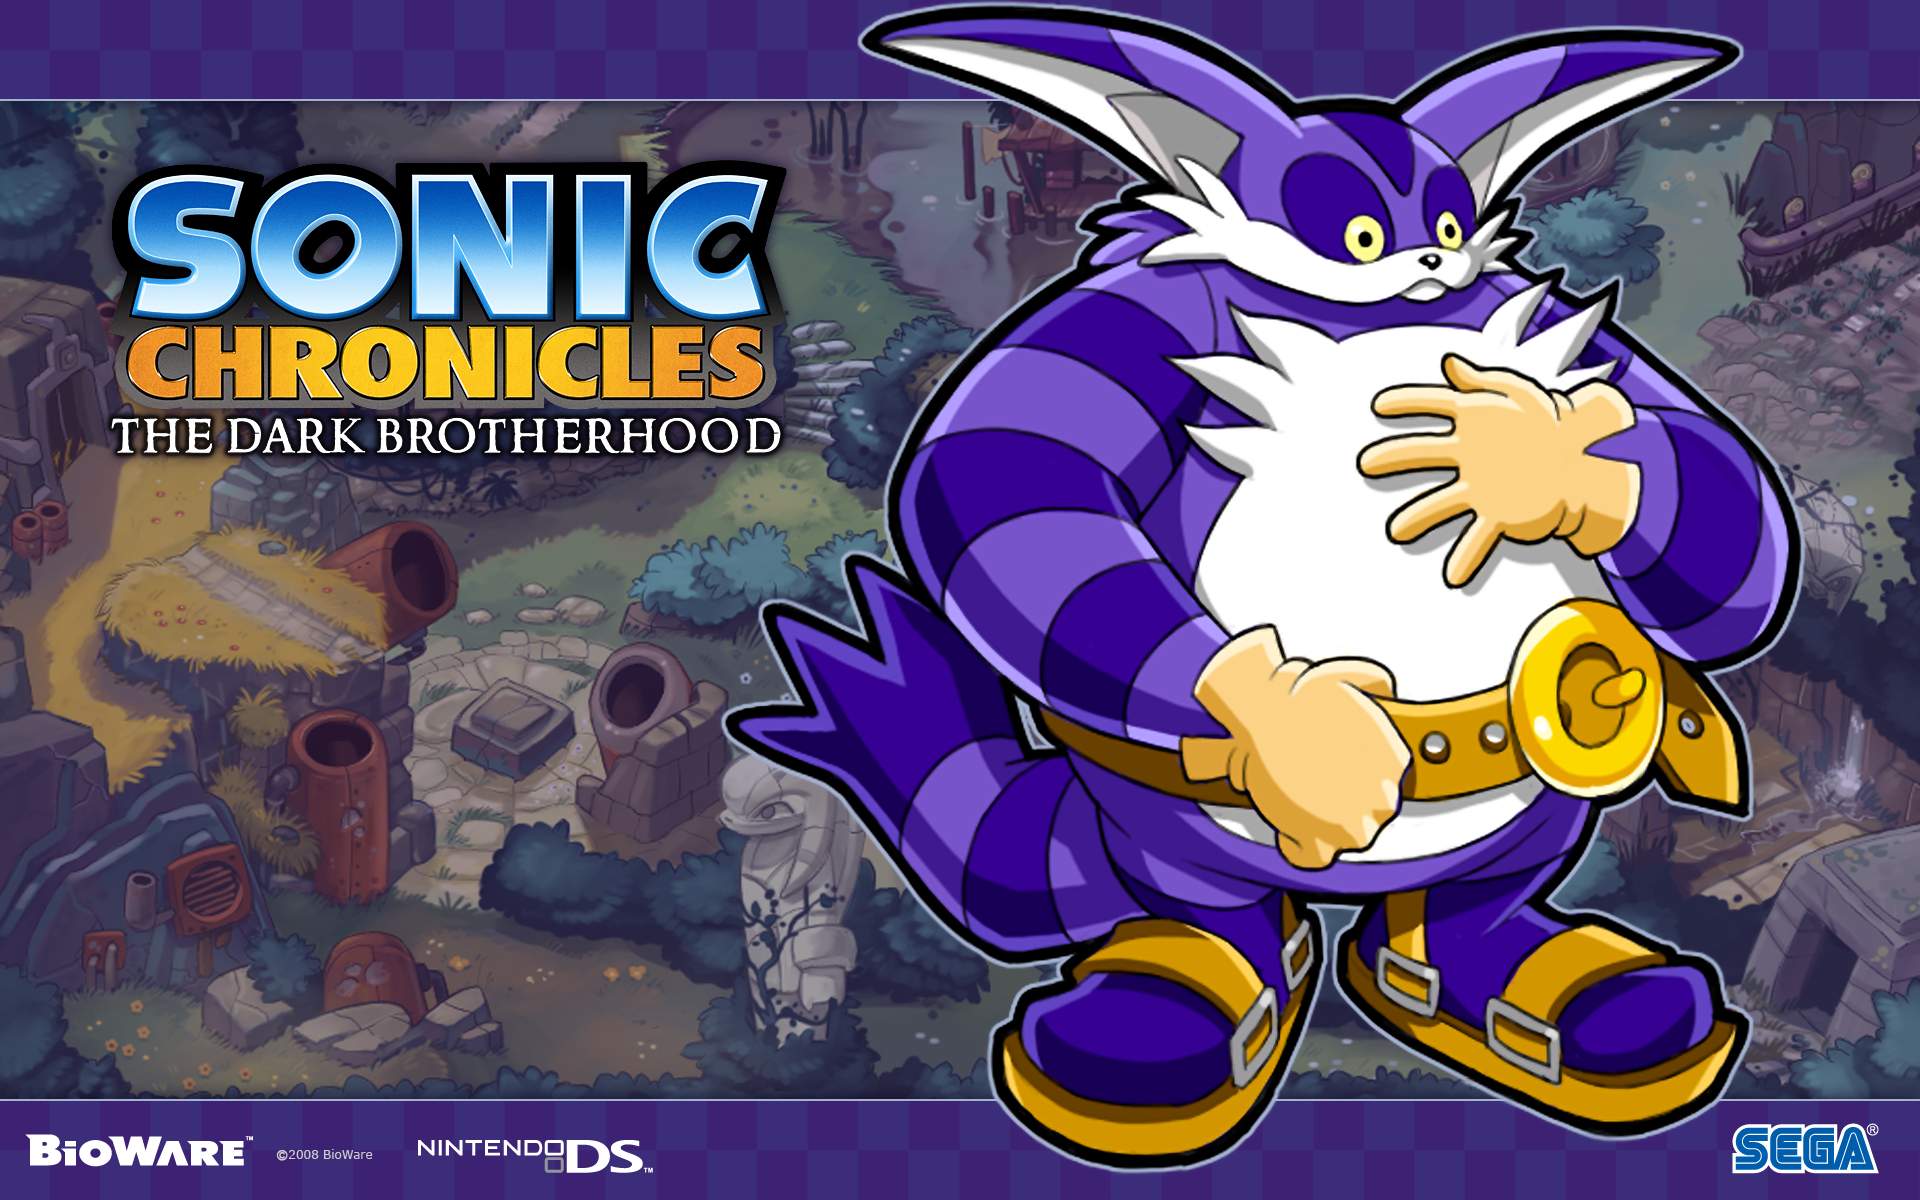 Wallpapers – Sonic Chronicles | Last Minute Continue1920 x 1200